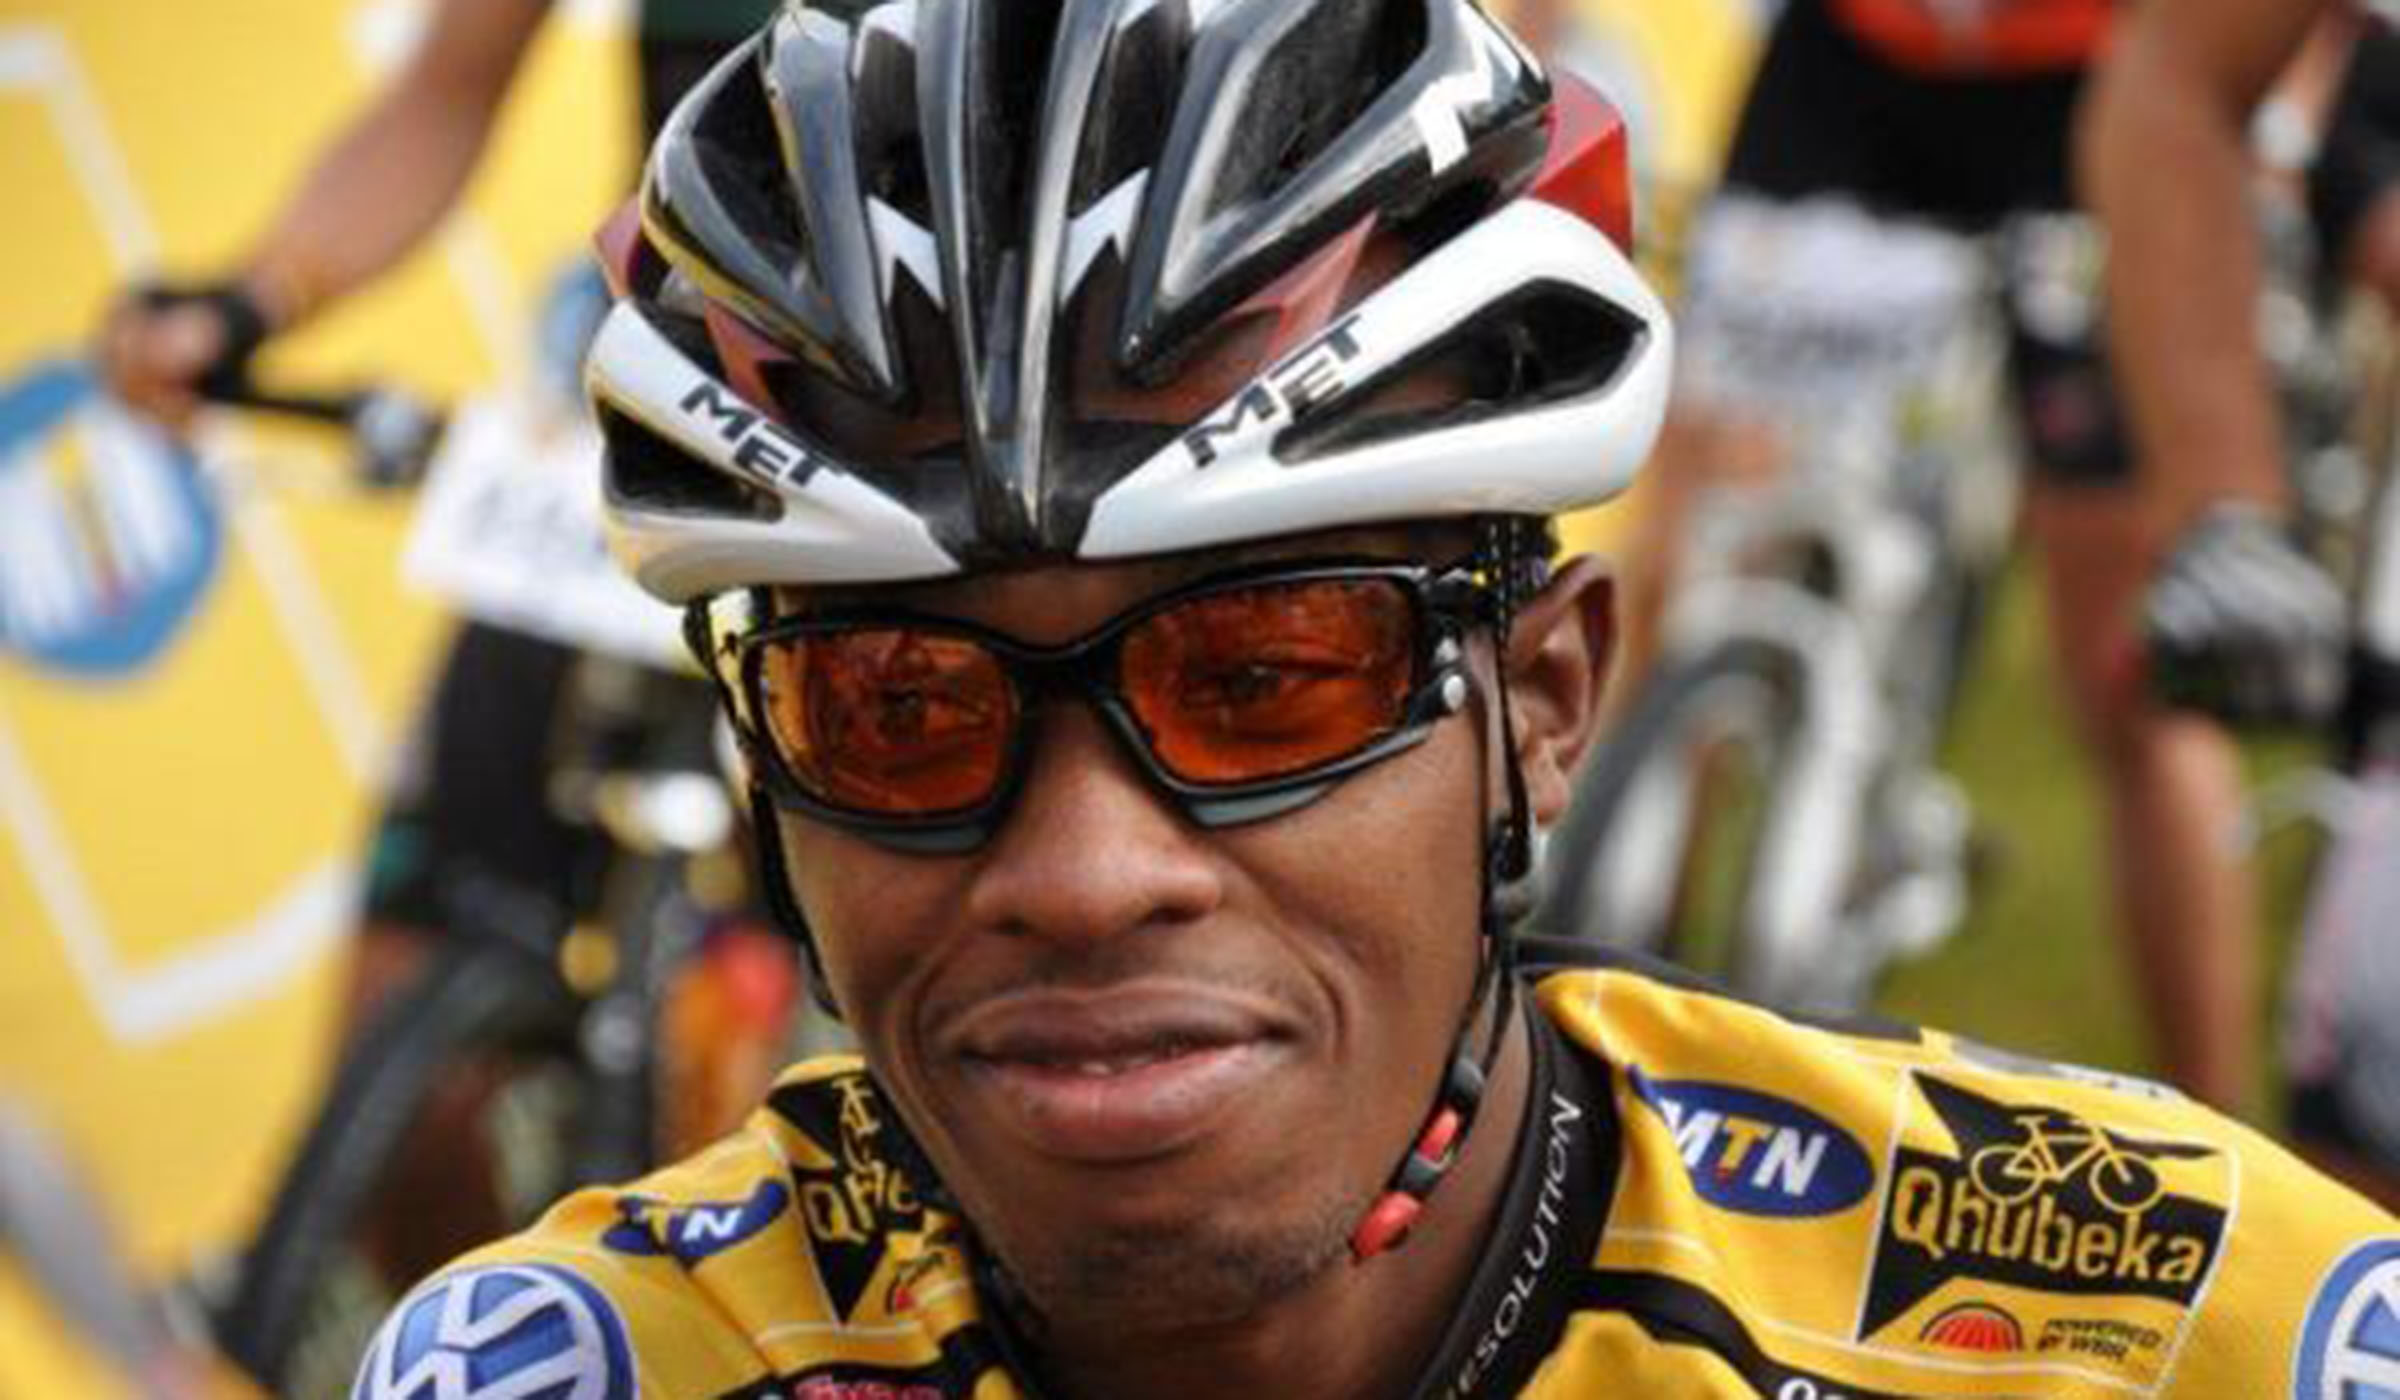 Adrien Niyonshuti, who is the first and only Rwandan rider to feature for a UCI World Tour team, is regarded as the country's all-time cycling great. File.